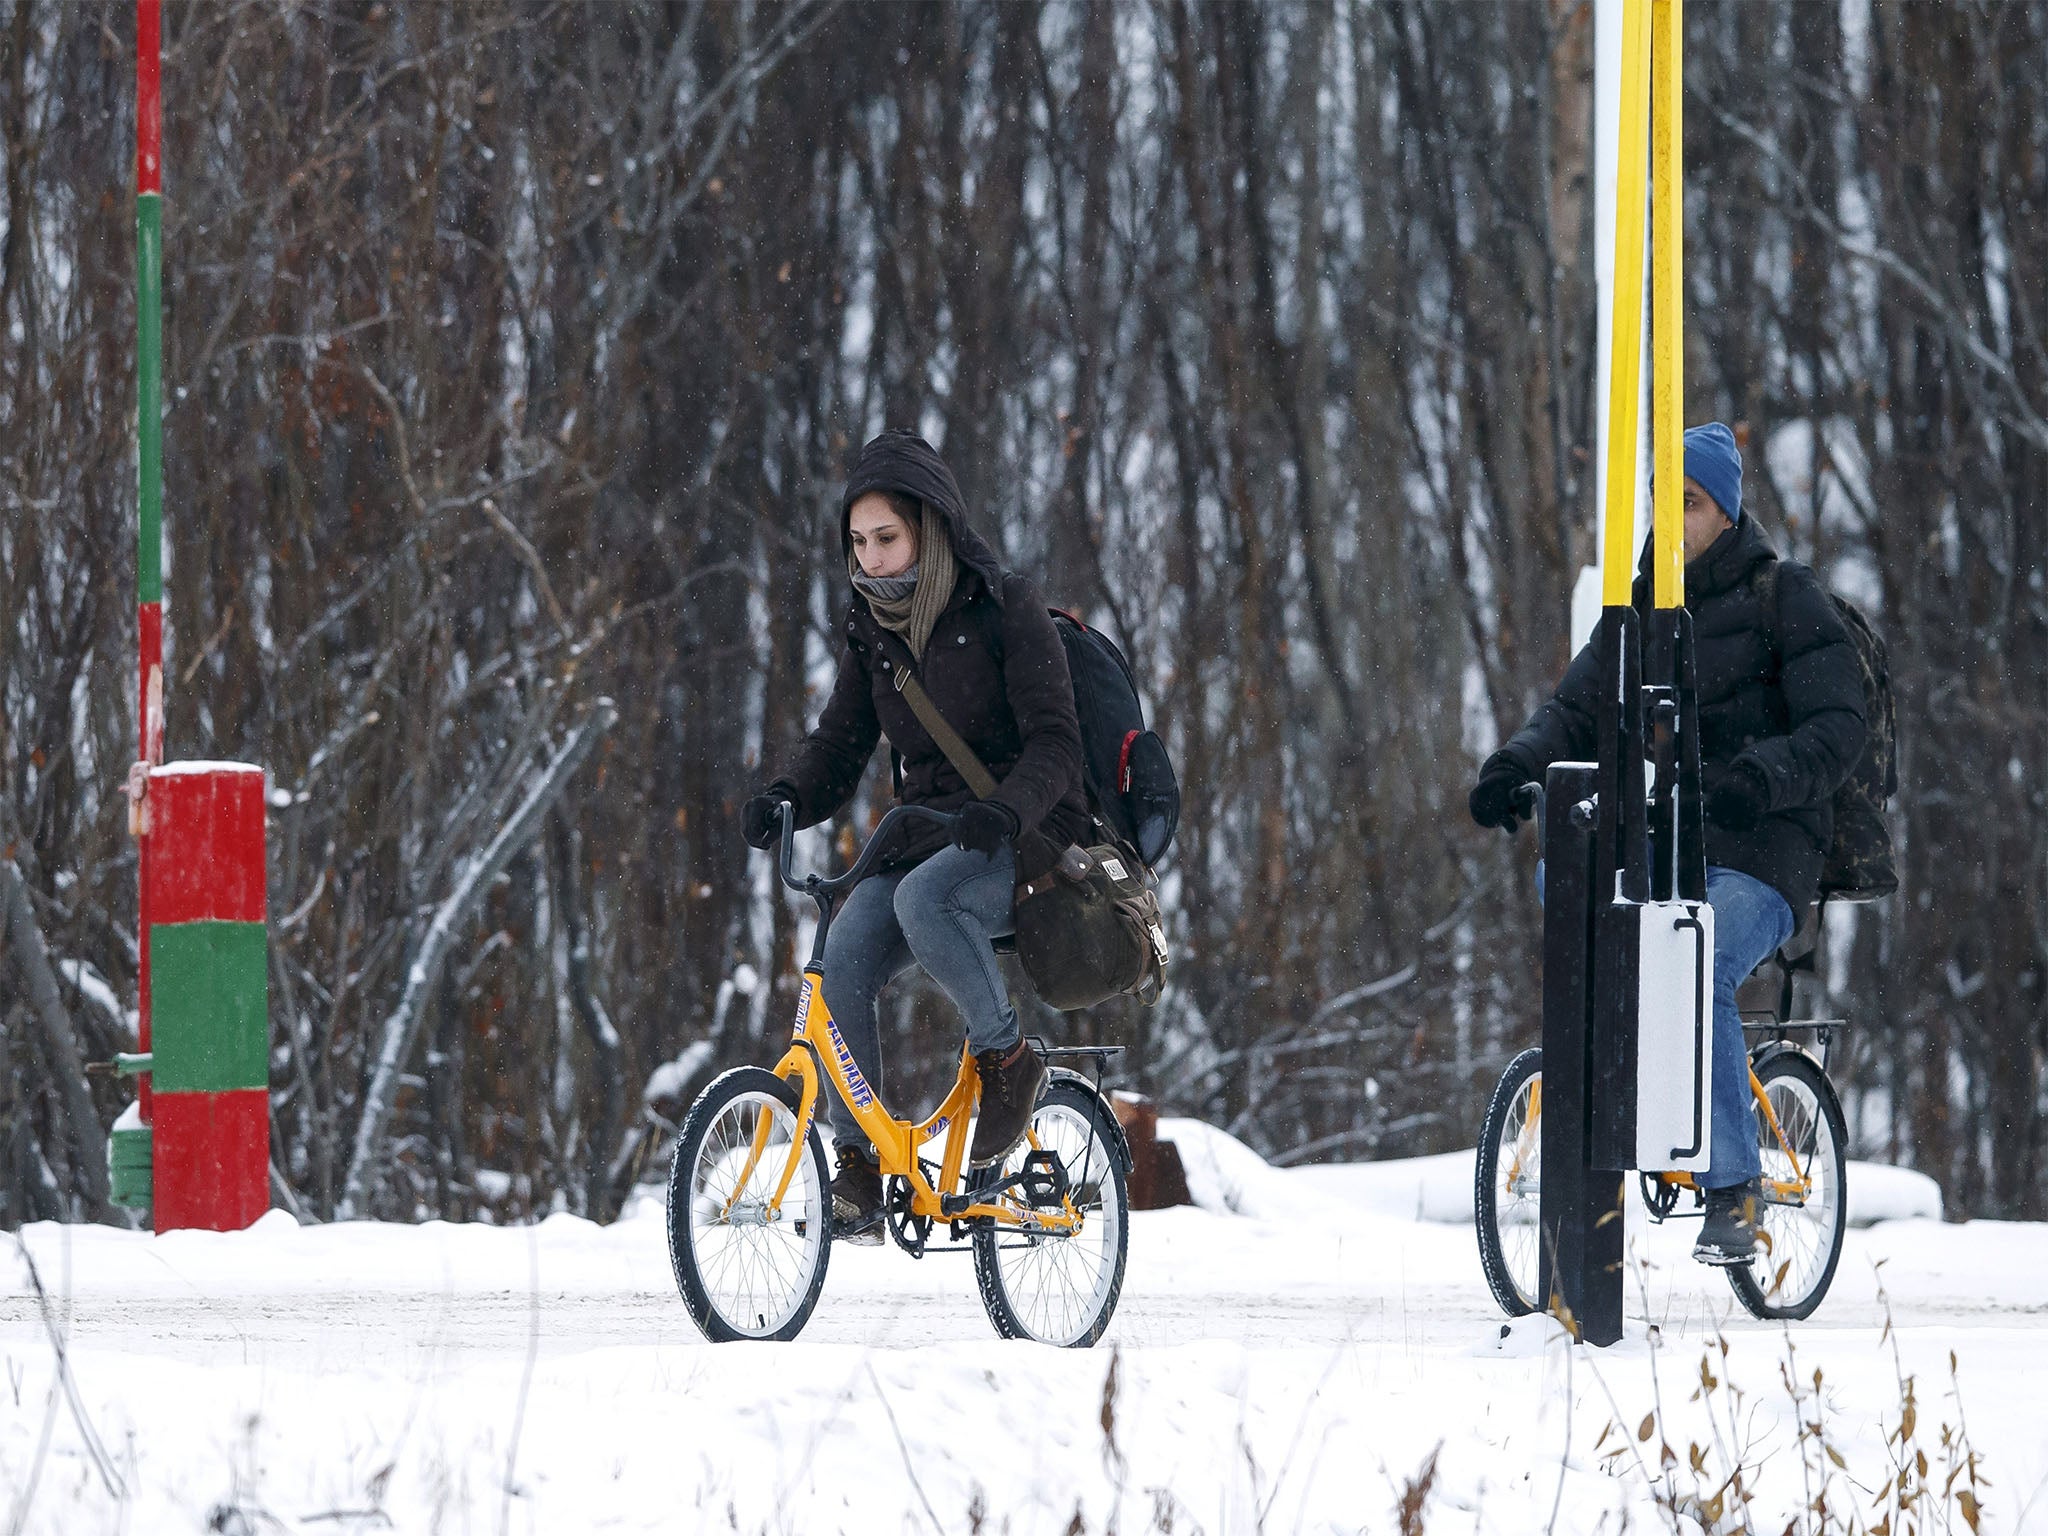 Two refugees attempt to cross the Norwegian border in the nearby town of Storskog